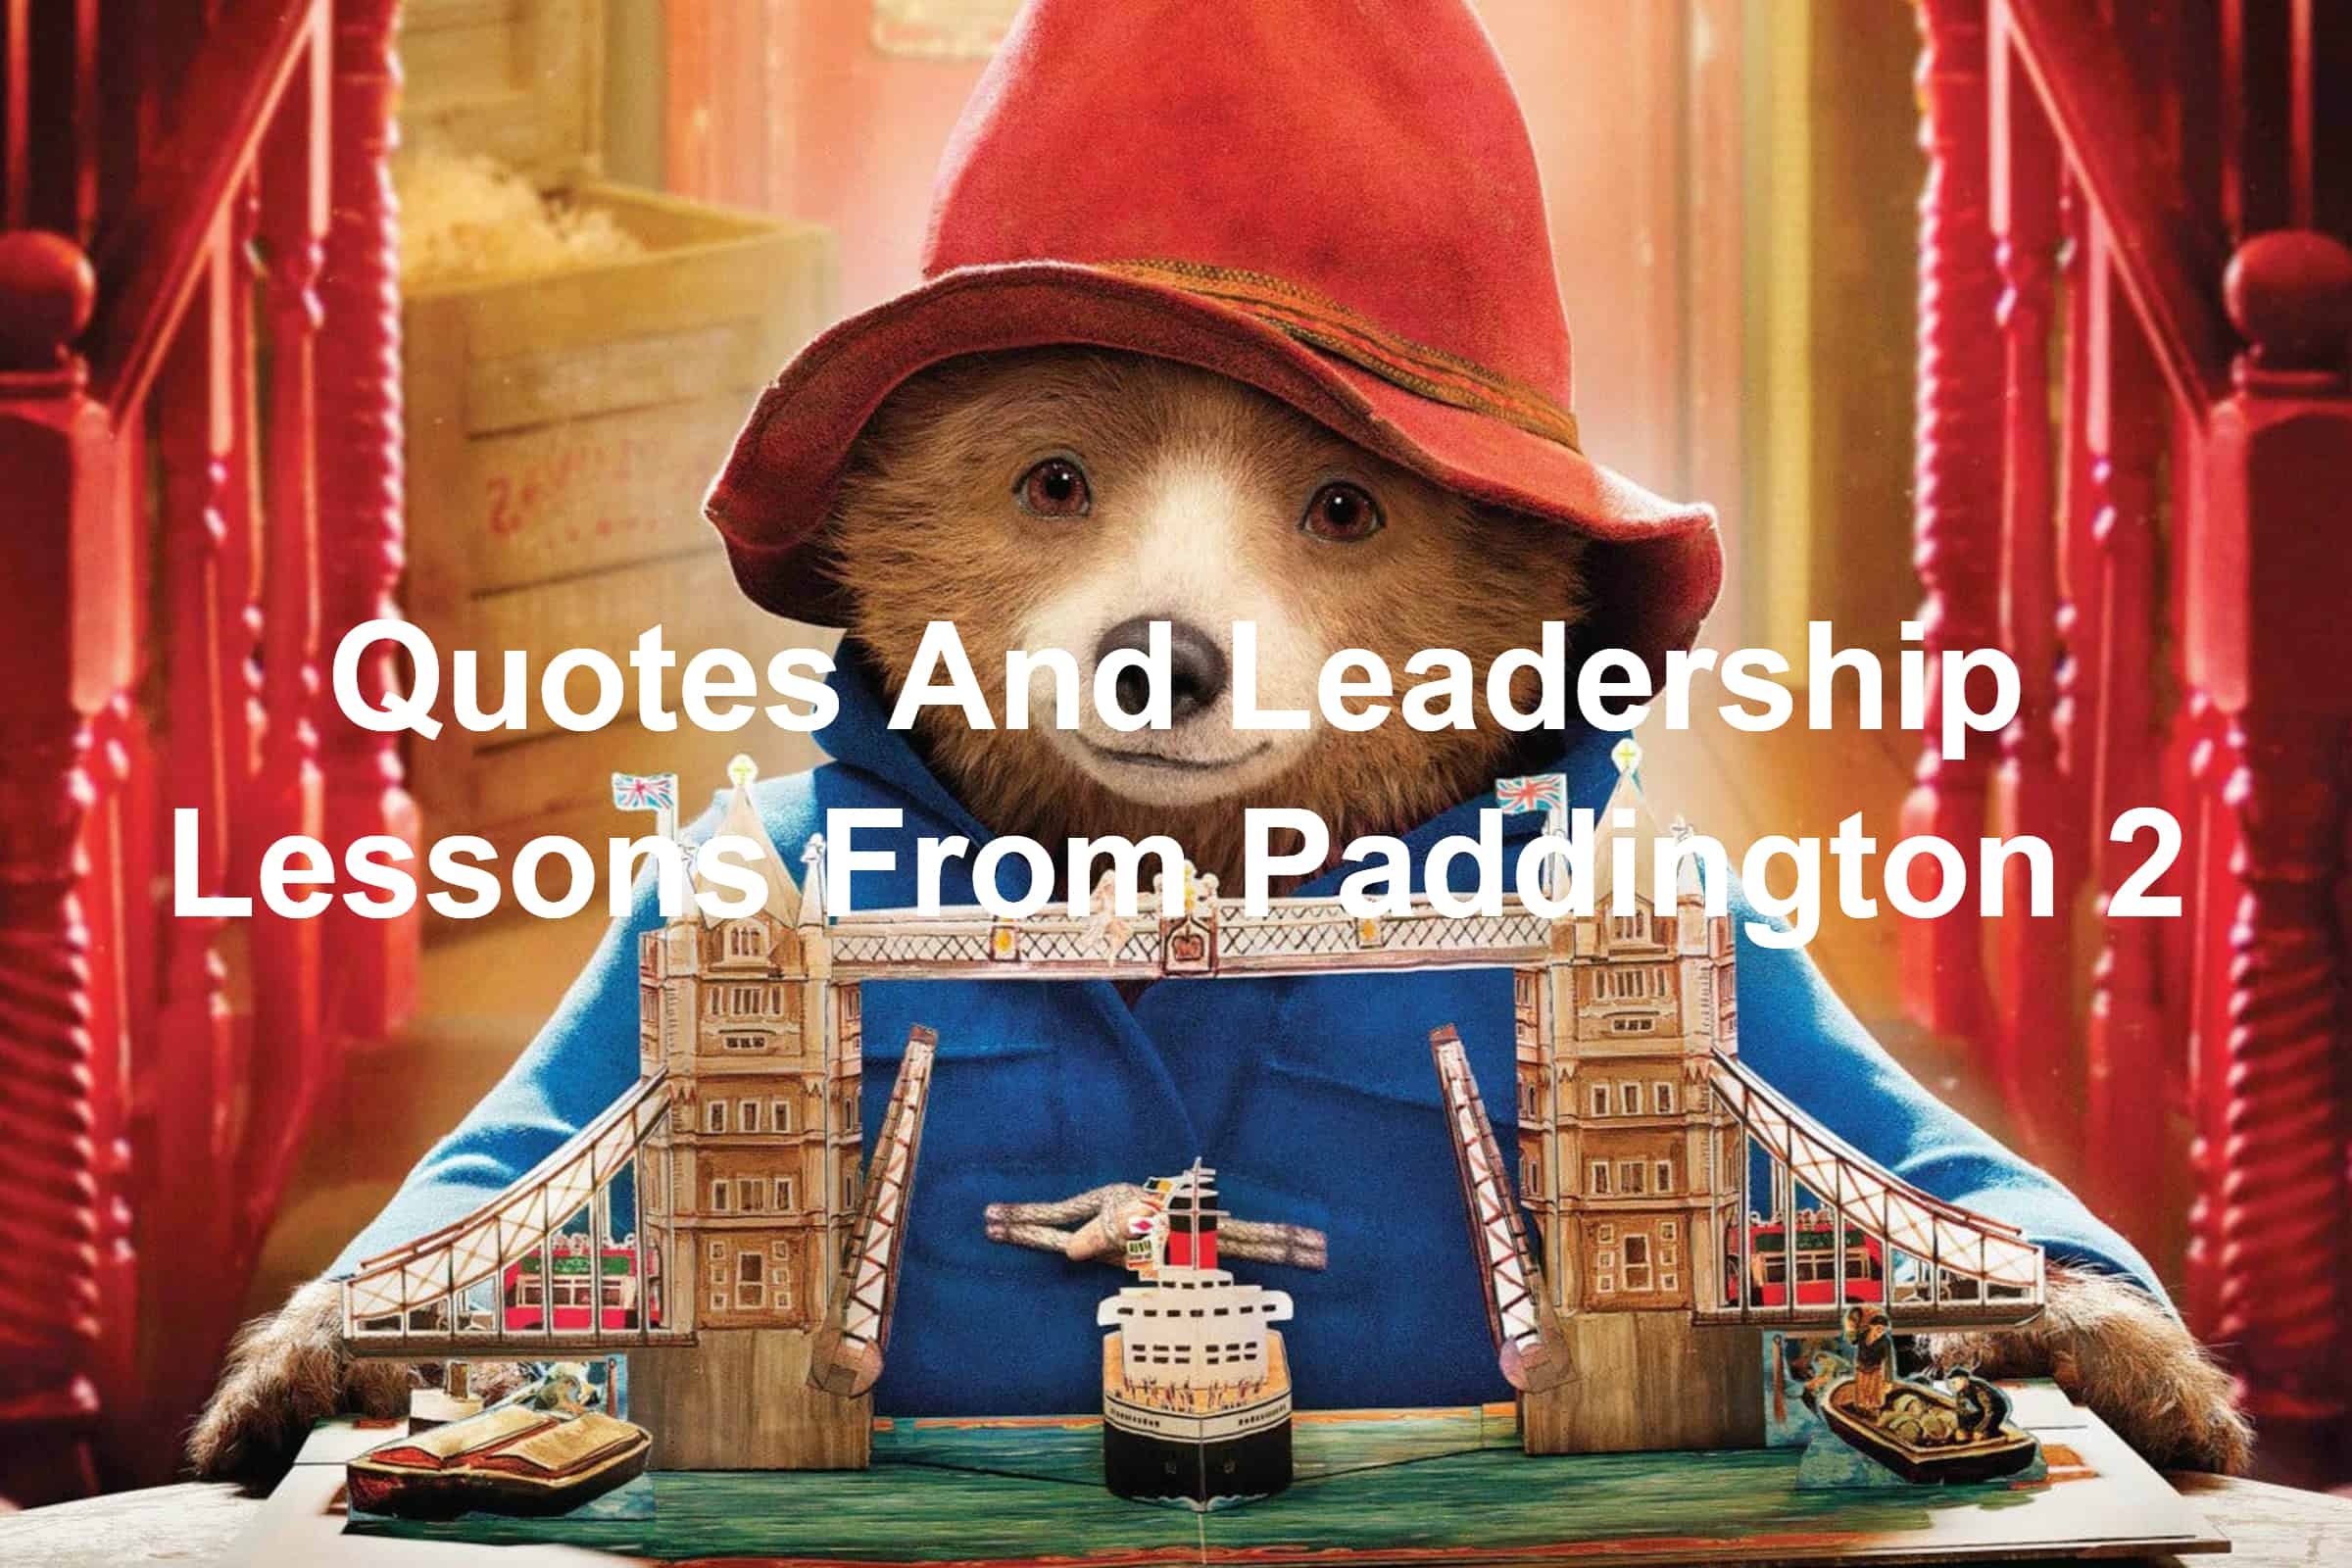 Learn leadership lessons from Paddington 2